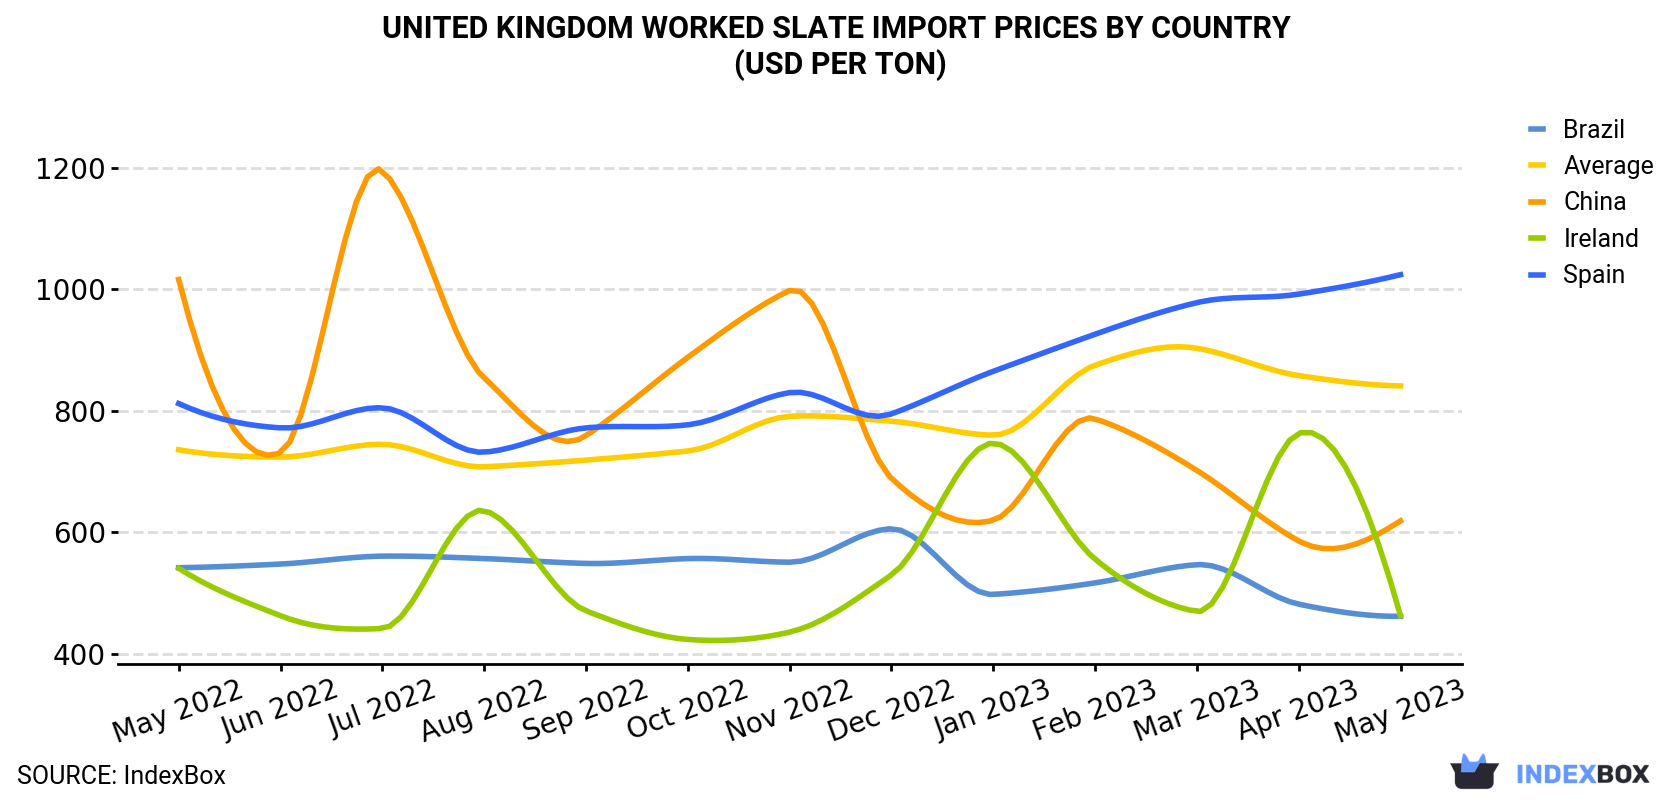 United Kingdom Worked Slate Import Prices By Country (USD Per Ton)